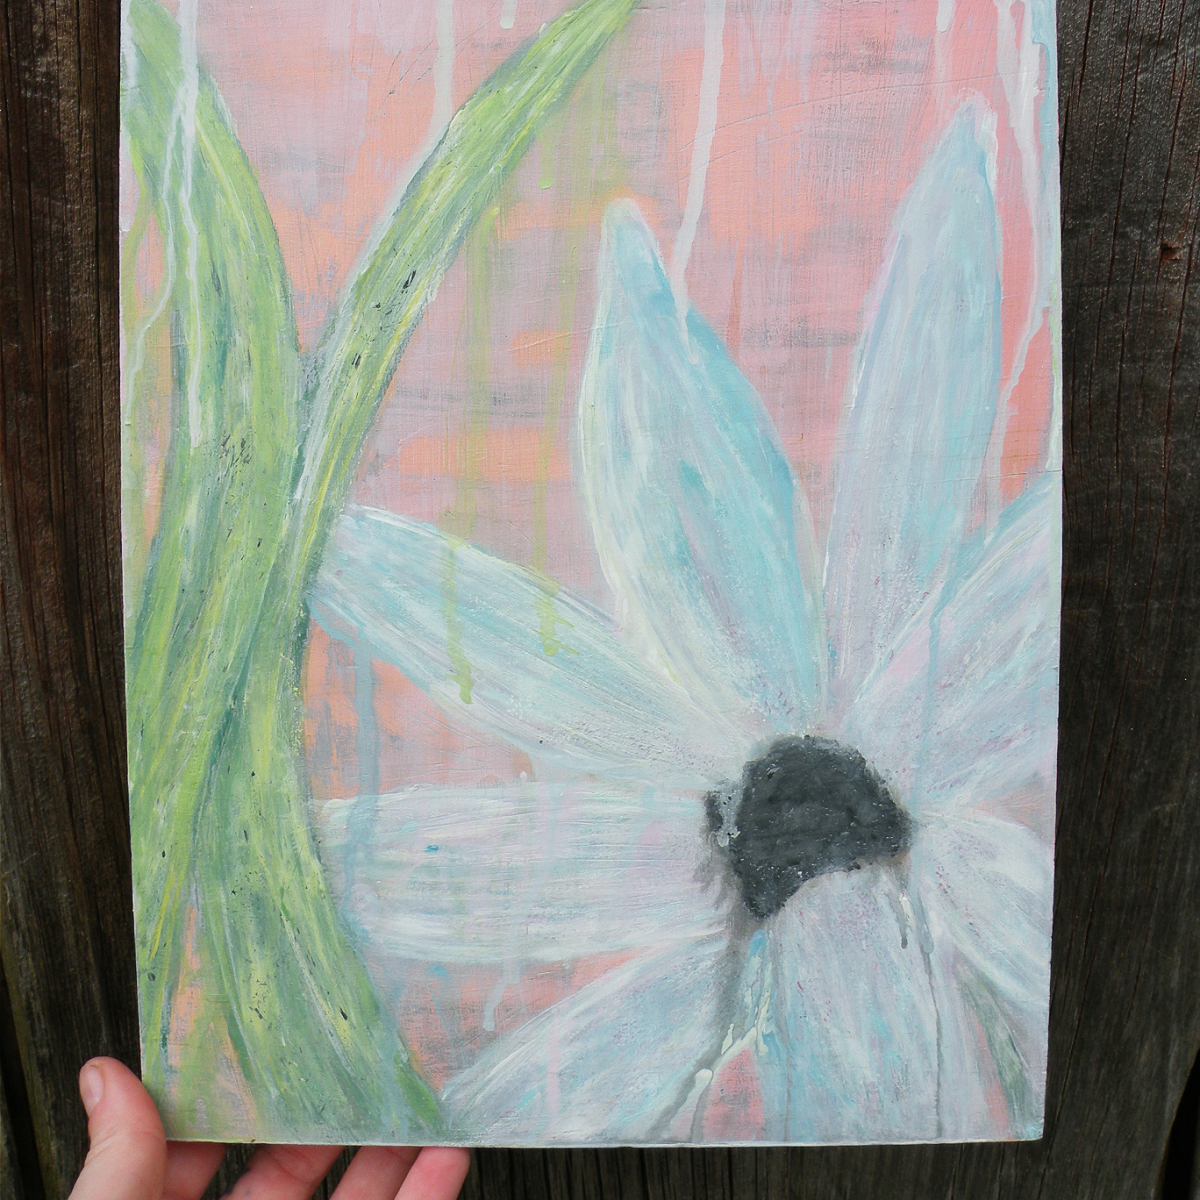 Drippy Floral Painting on Wood